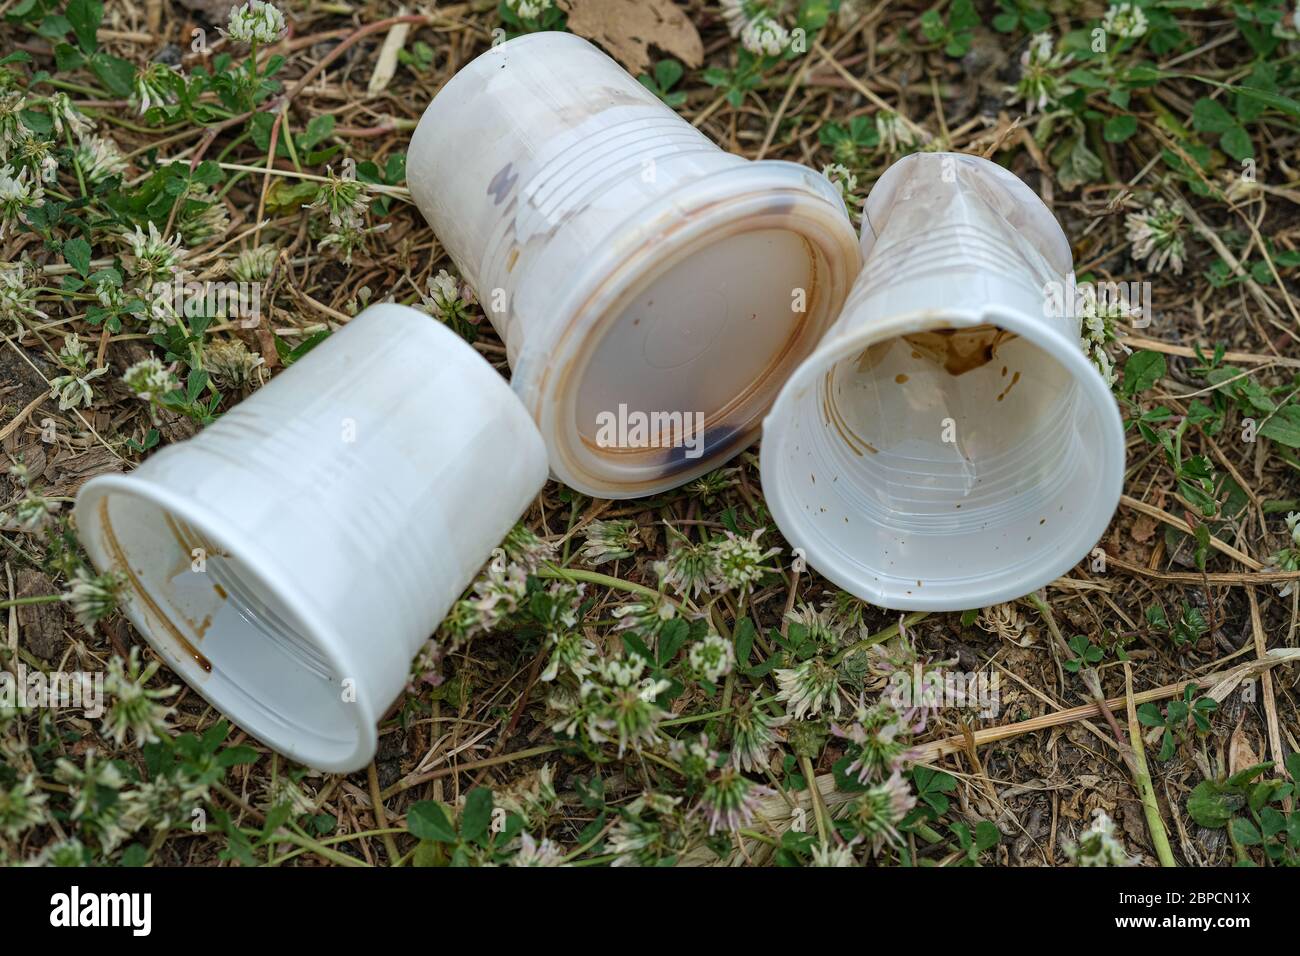 Take away plastic coffee used glass discharged waste,dirty disposable pollution Stock Photo